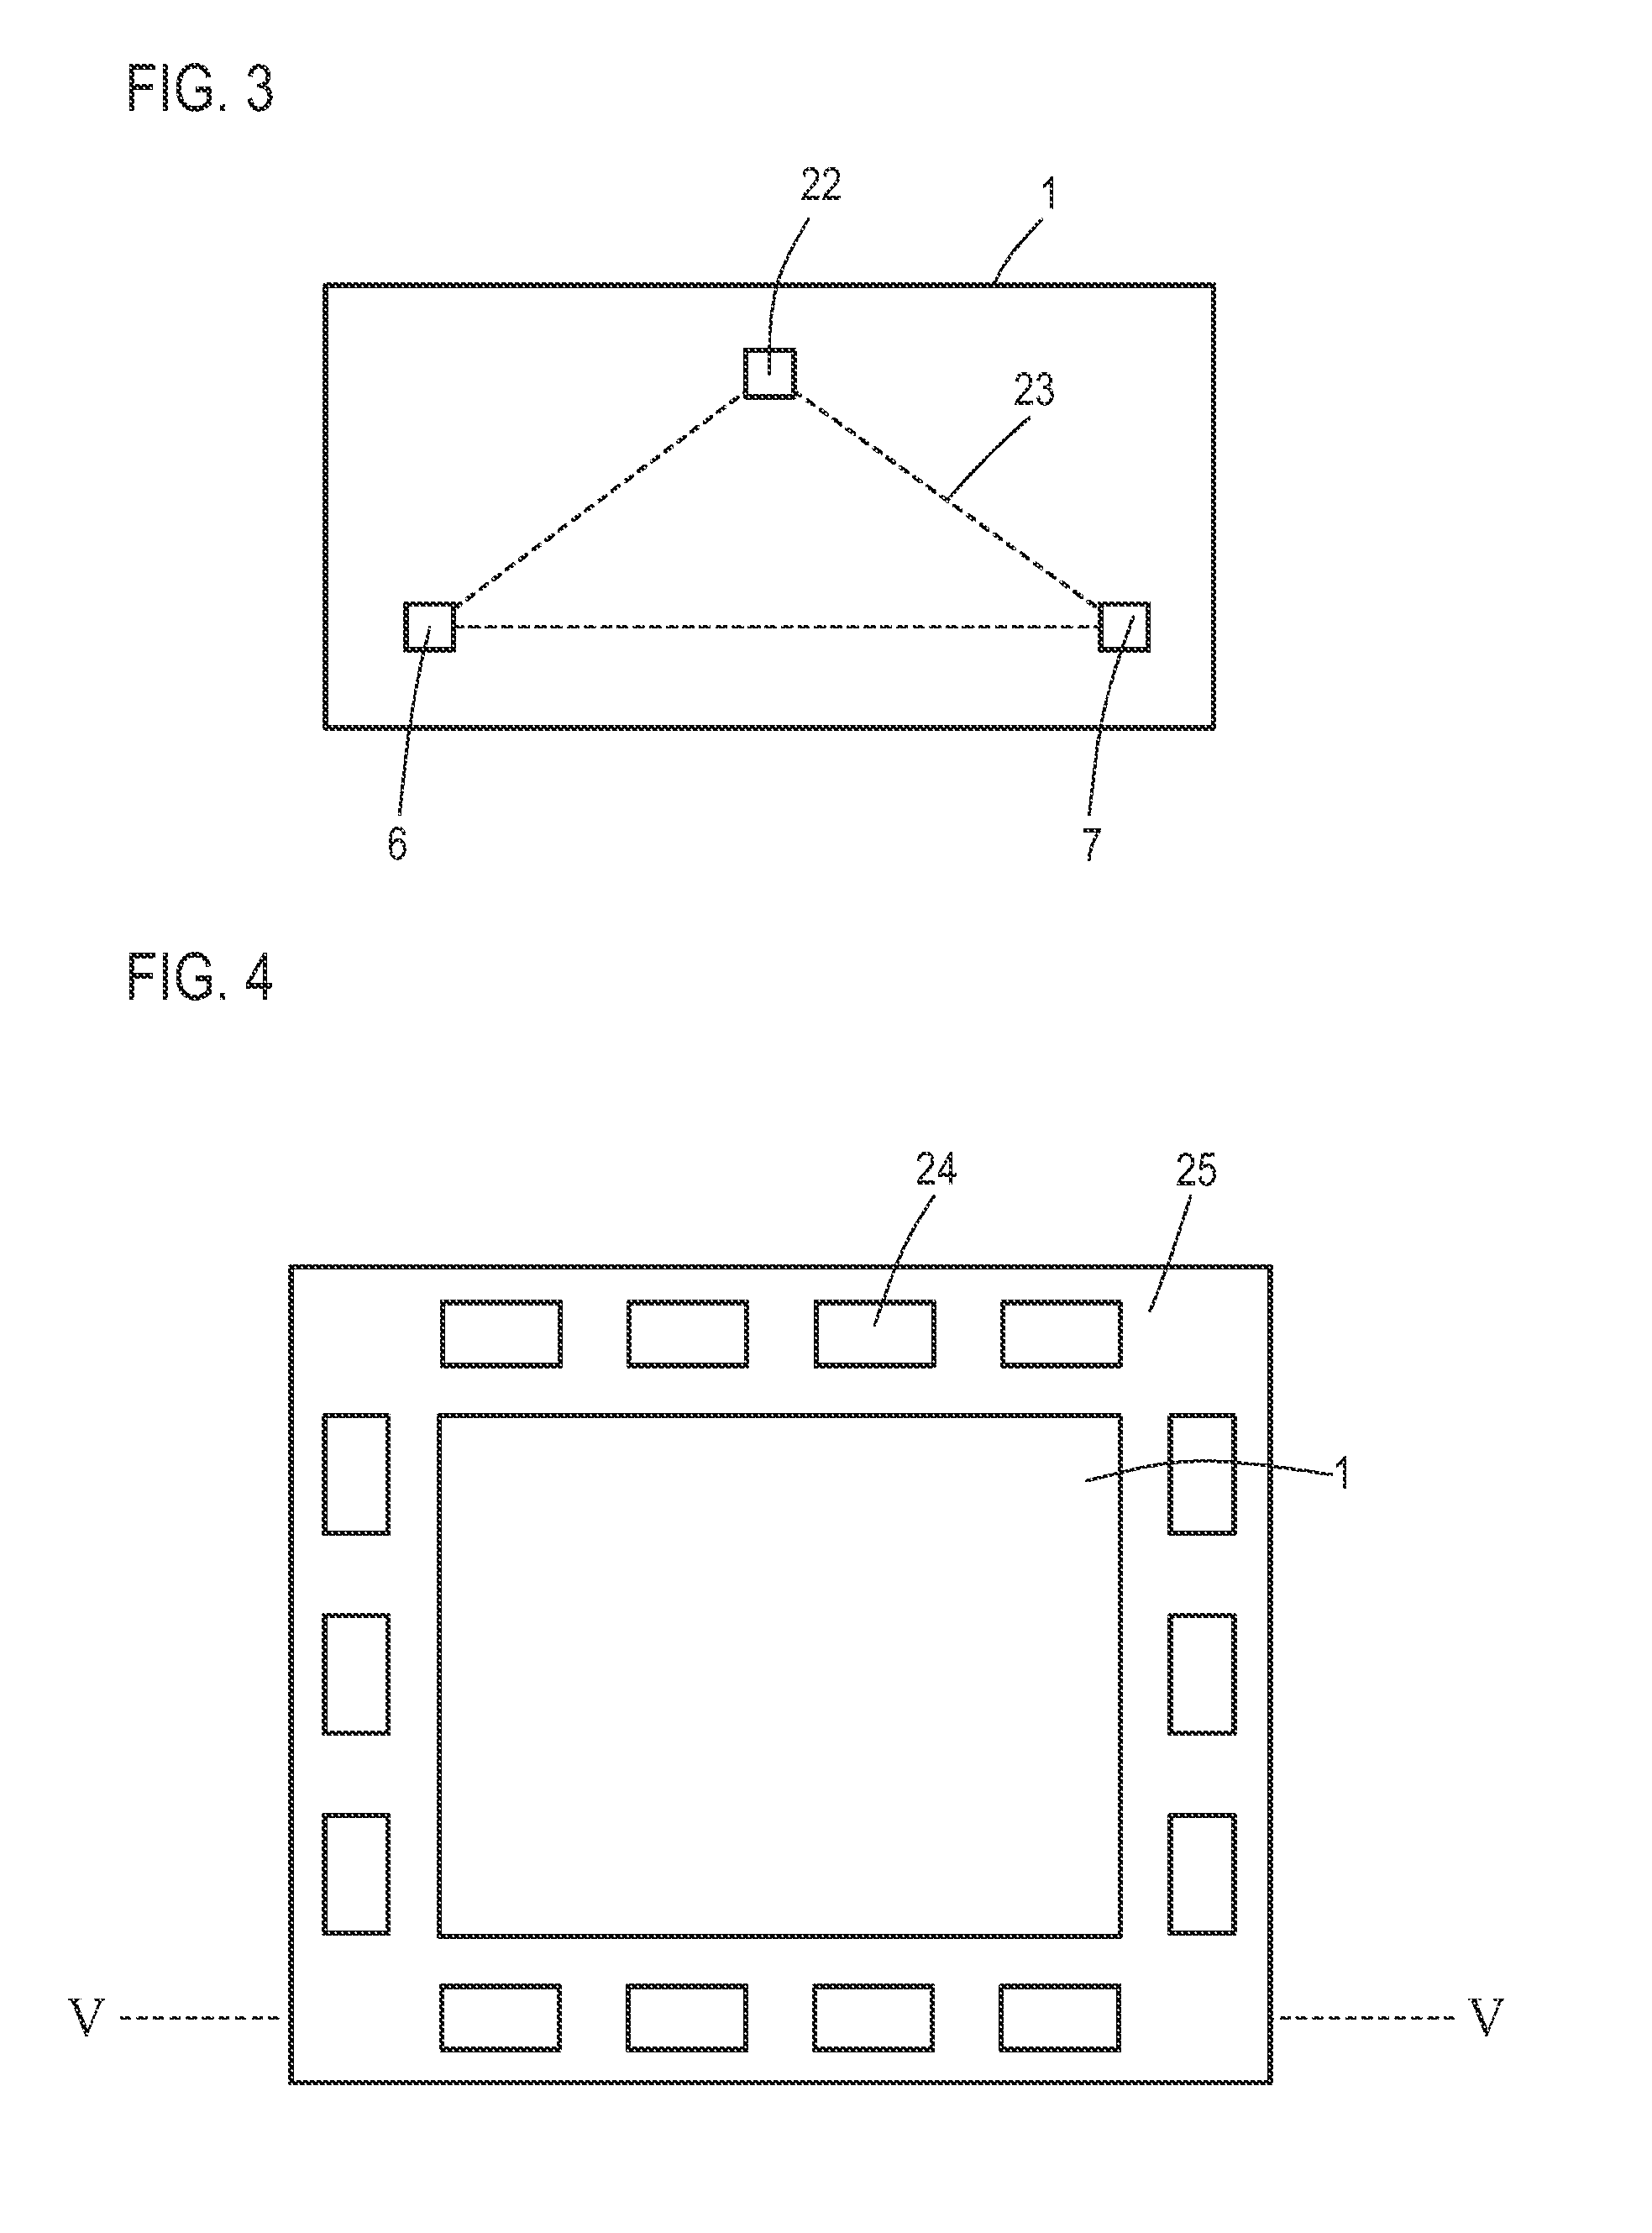 Oscillating conveyor for 2-dimensional movement of objects and method for operation of the oscillating conveyor